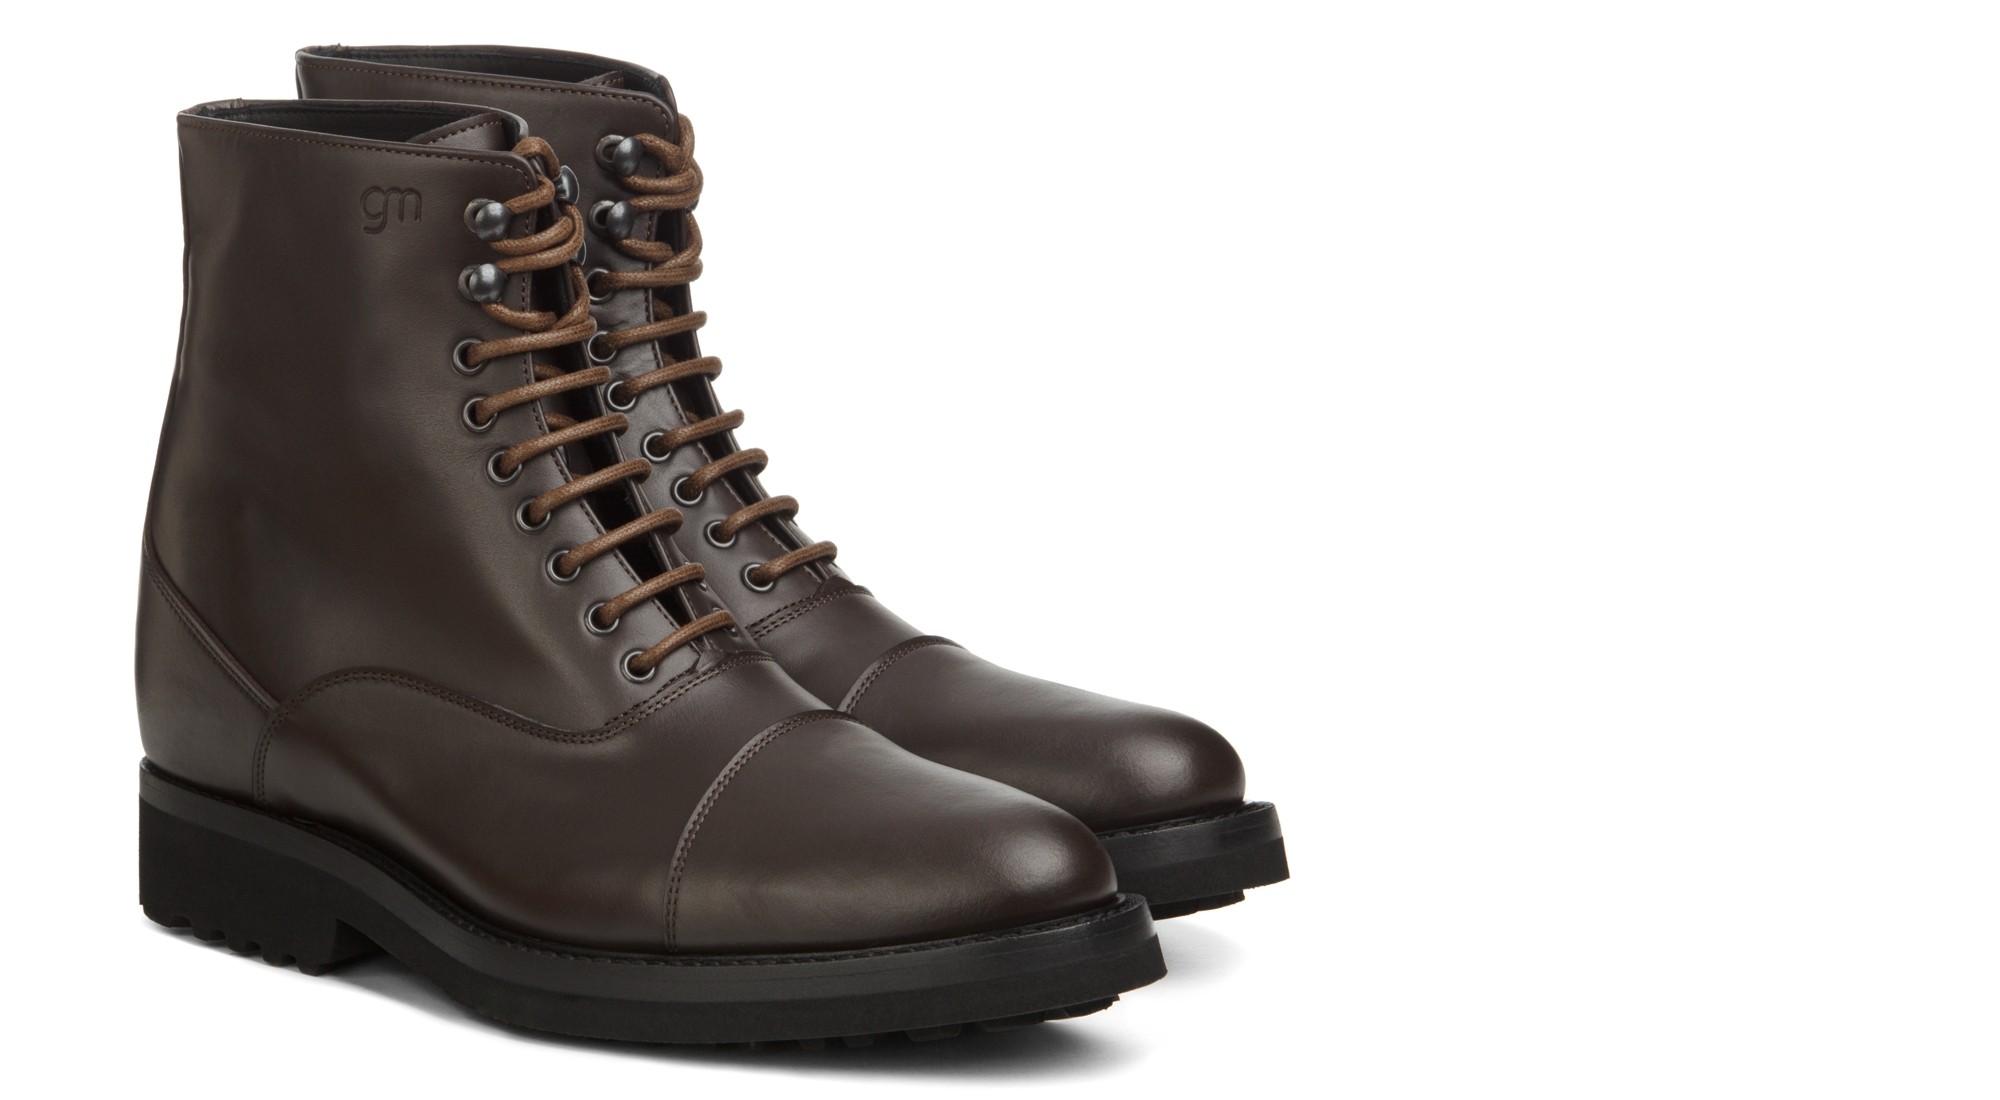 Suva - Elevator Boots in Full Grain Leather from 2.4 to 4 inches